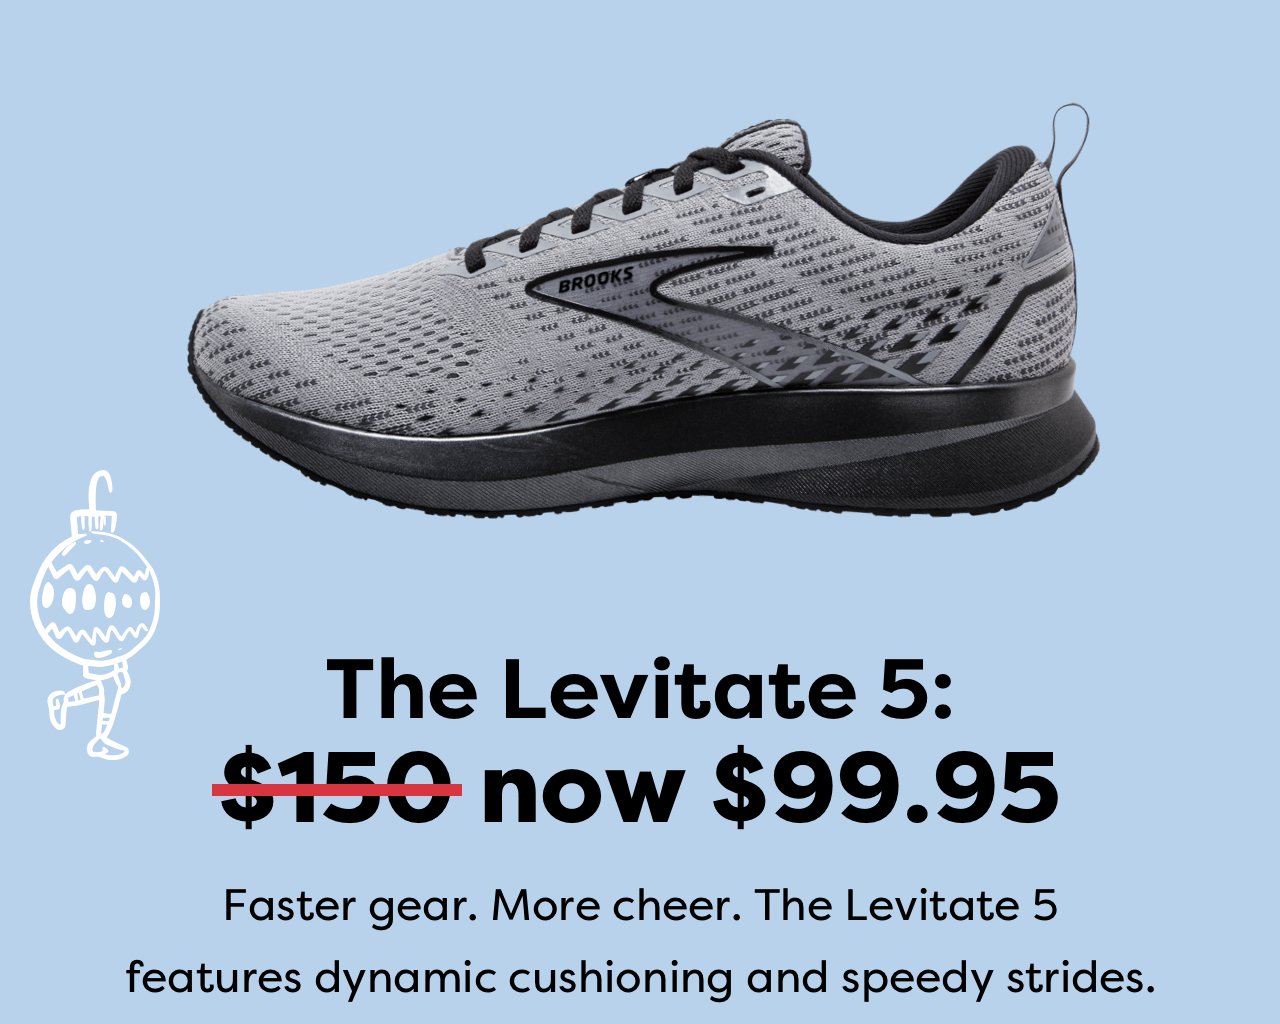 The Levitate 5: $150 now $99.95 | Faster gear. More cheer. The Levitate 5 features dynamic cushioning and speedy strides.